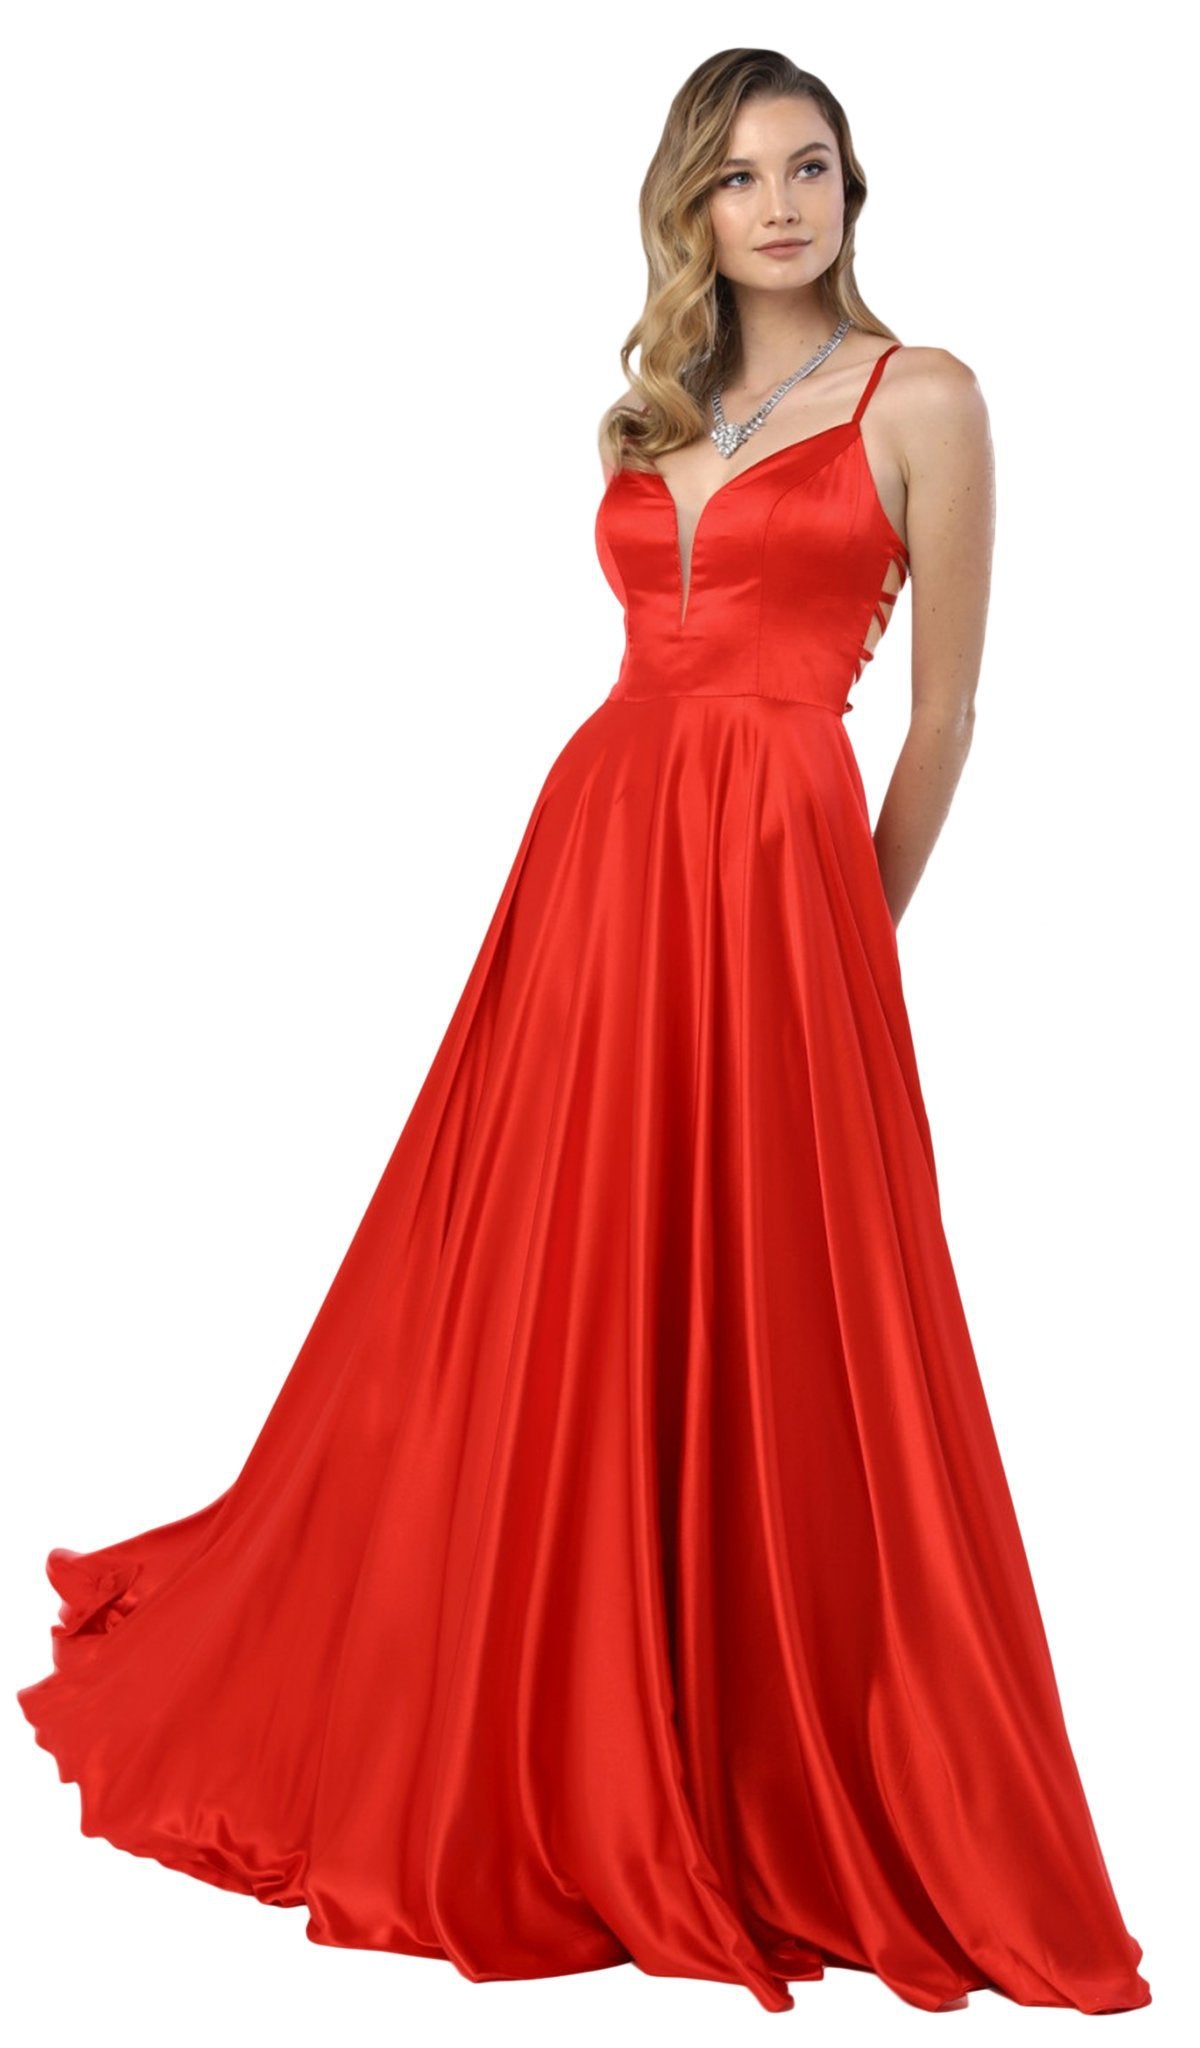 Nox Anabel - A180 Deep V-neck A-line Dress With Strappy Back Special Occasion Dress XS / Red